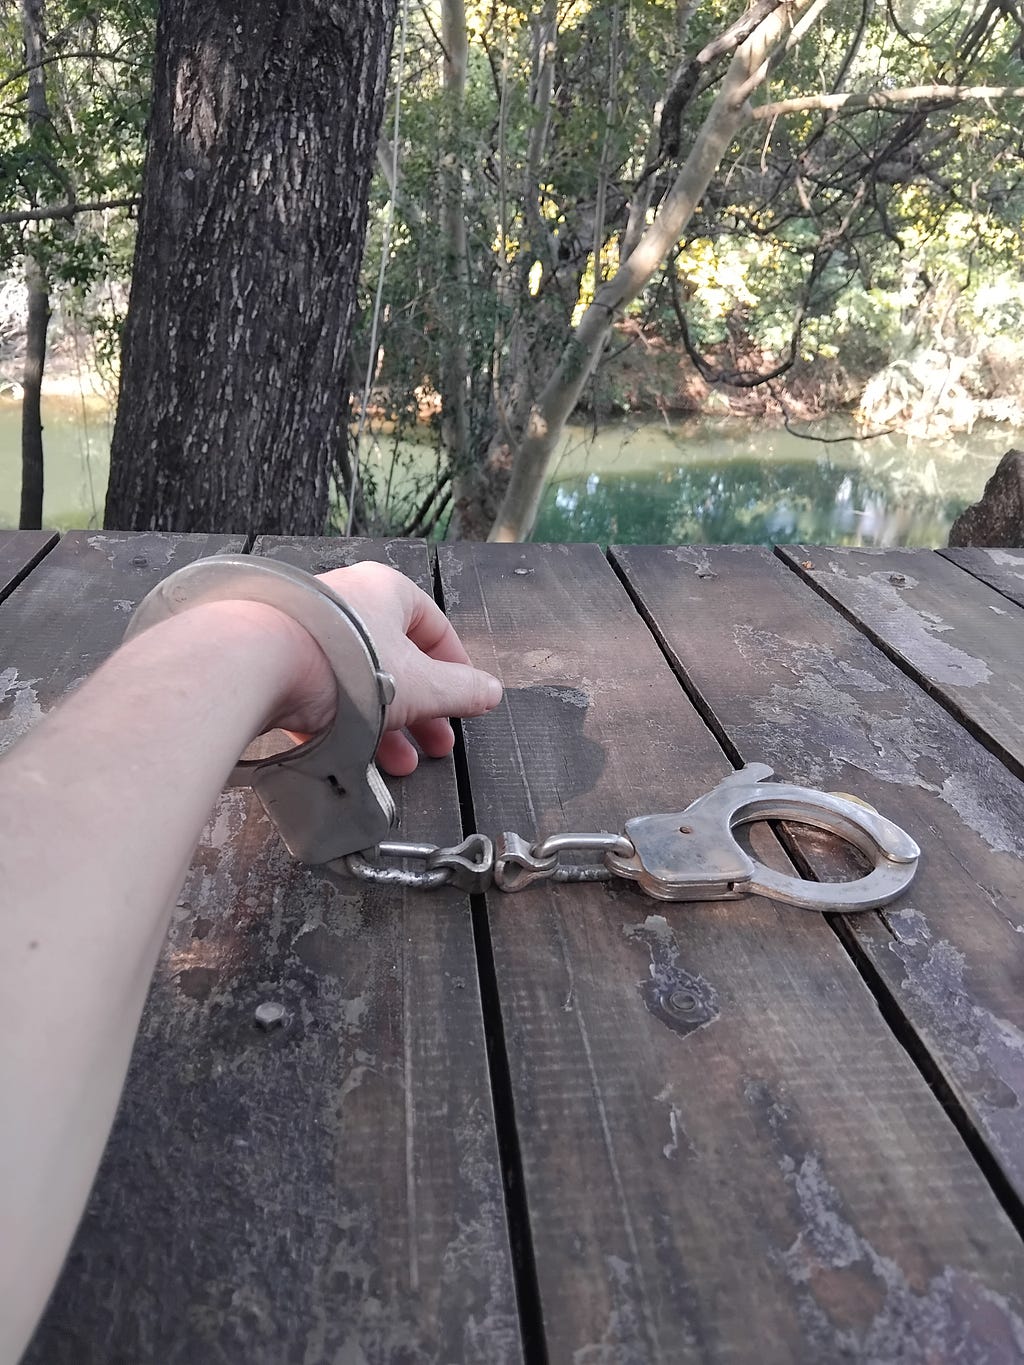 A Caucasian arm with one handcuff around the wrist, resting on a wood table, and a river in the background